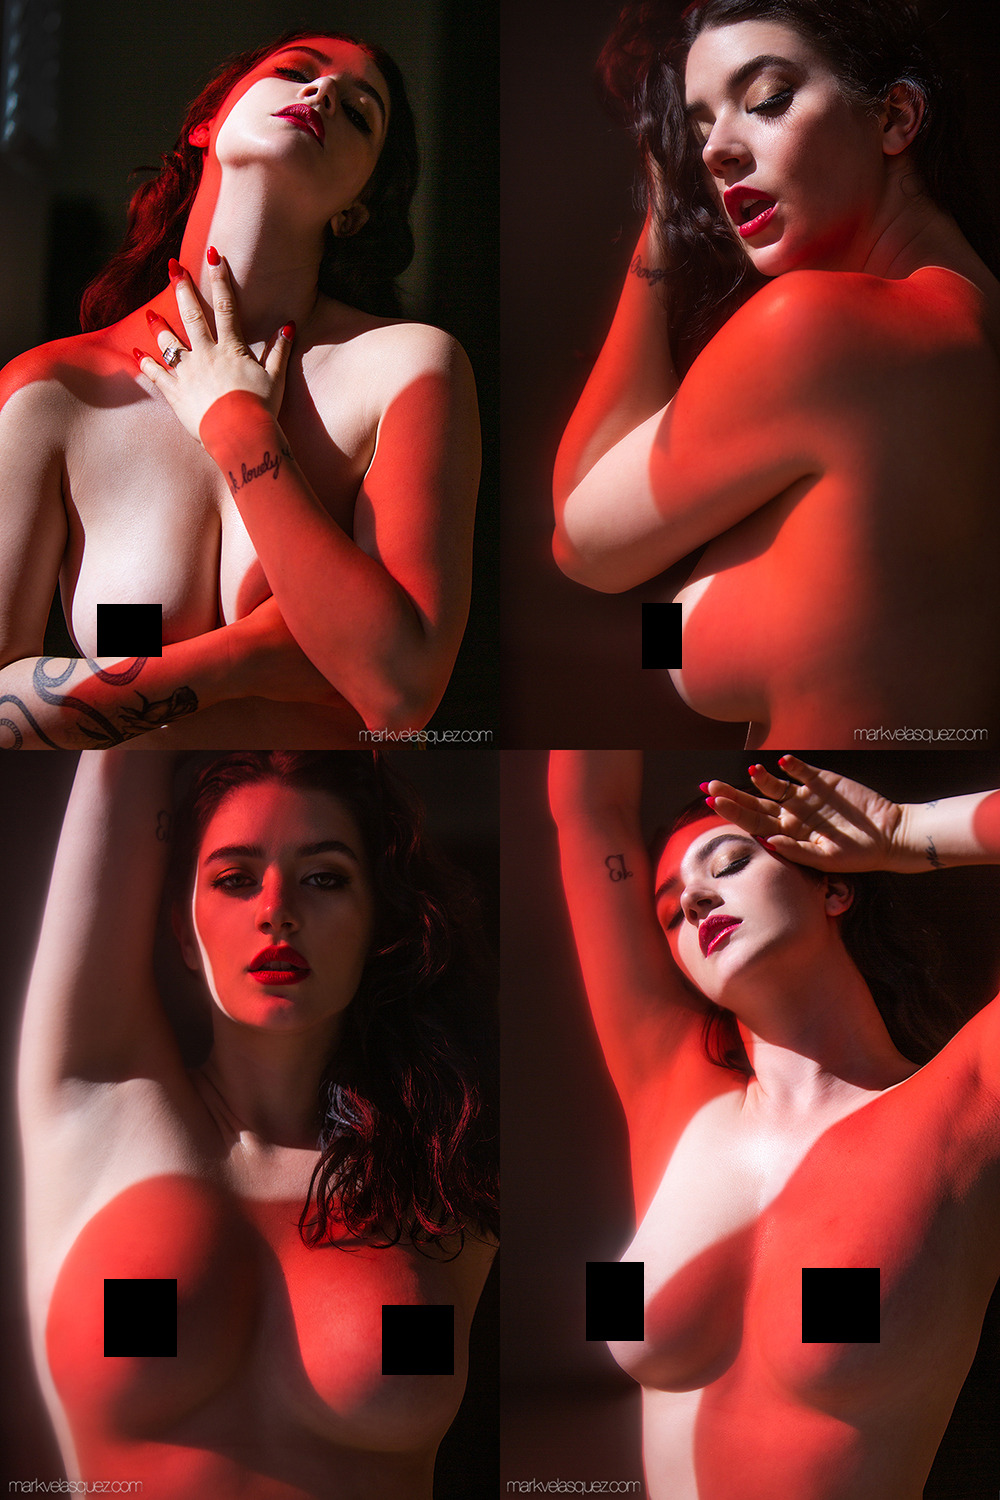 markvelasquez: “Red Hot,” 2019 Find this special series and all my uncensored